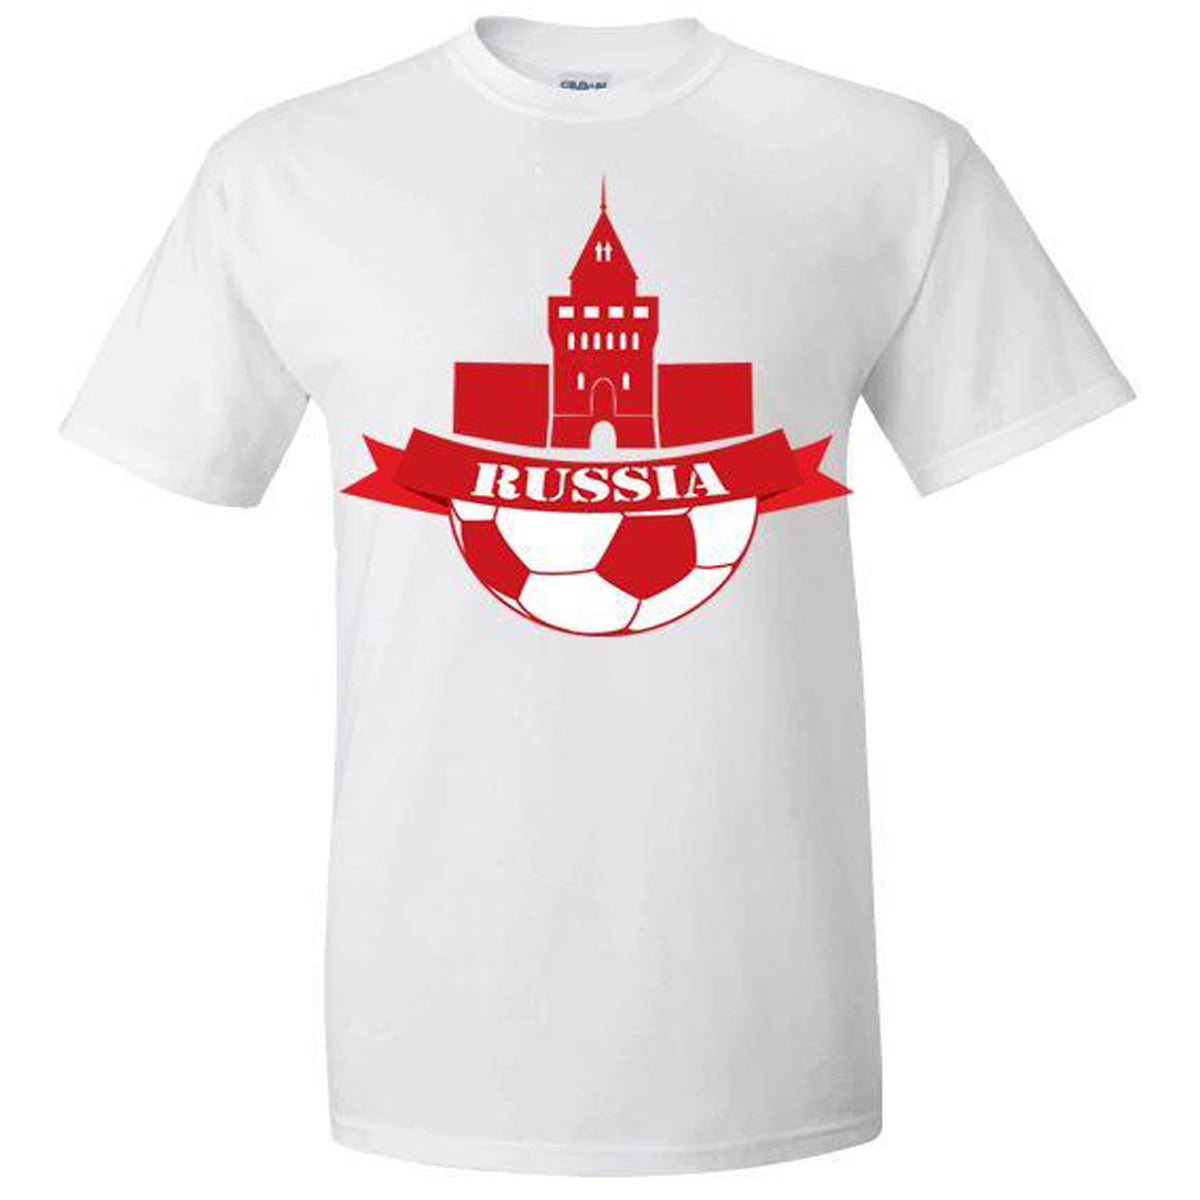 Russia World Cup 2022 Spirit Tee | Various Designs Shirt 411 Red Youth Medium Youth